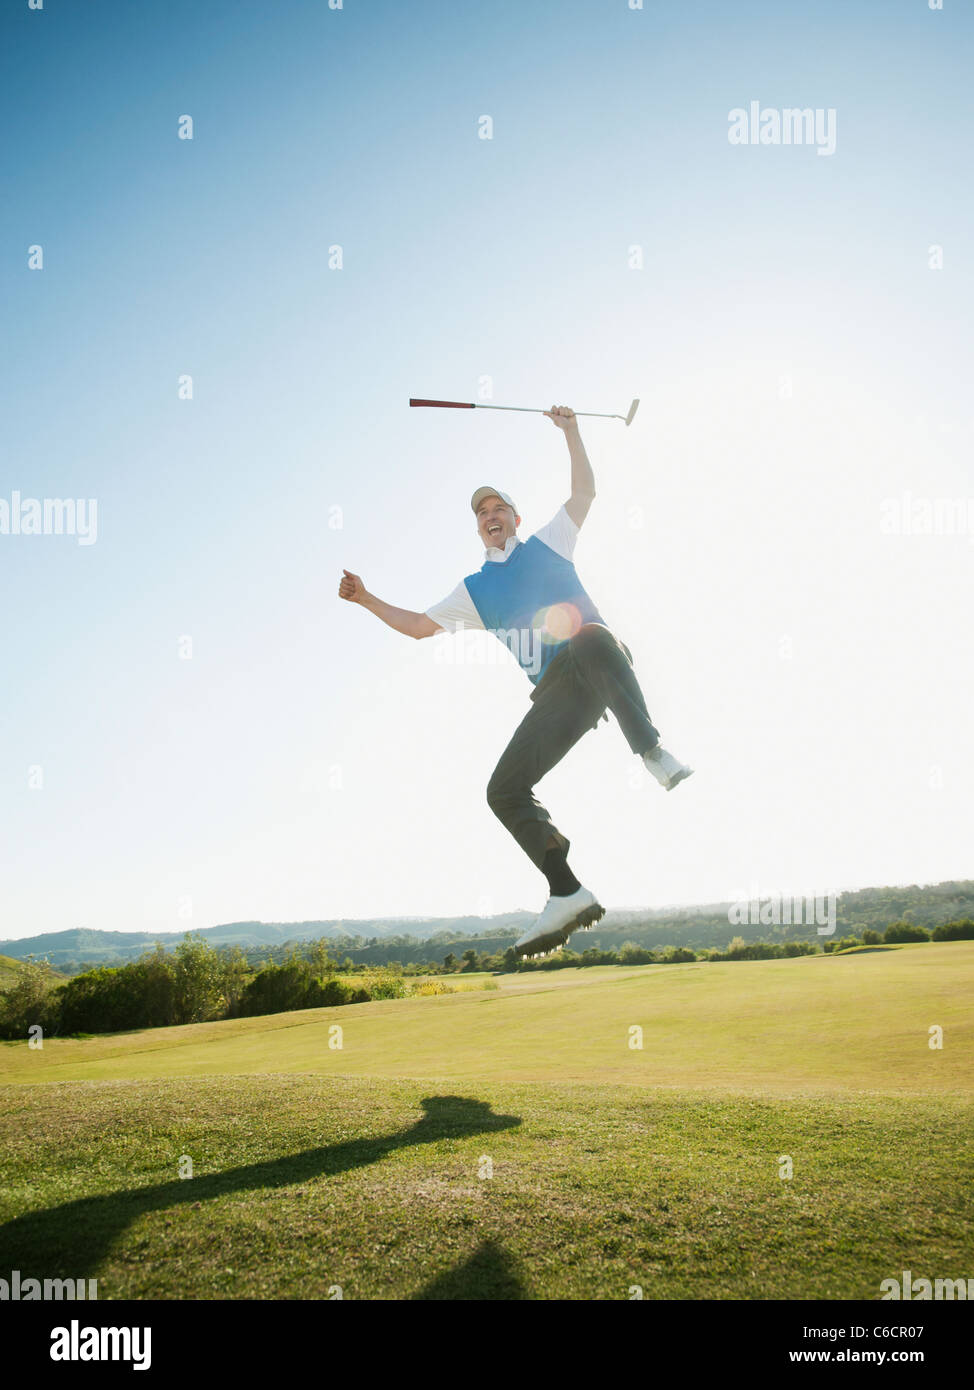 Excited Caucasian golfer jumping in mid-air on golf course Stock Photo